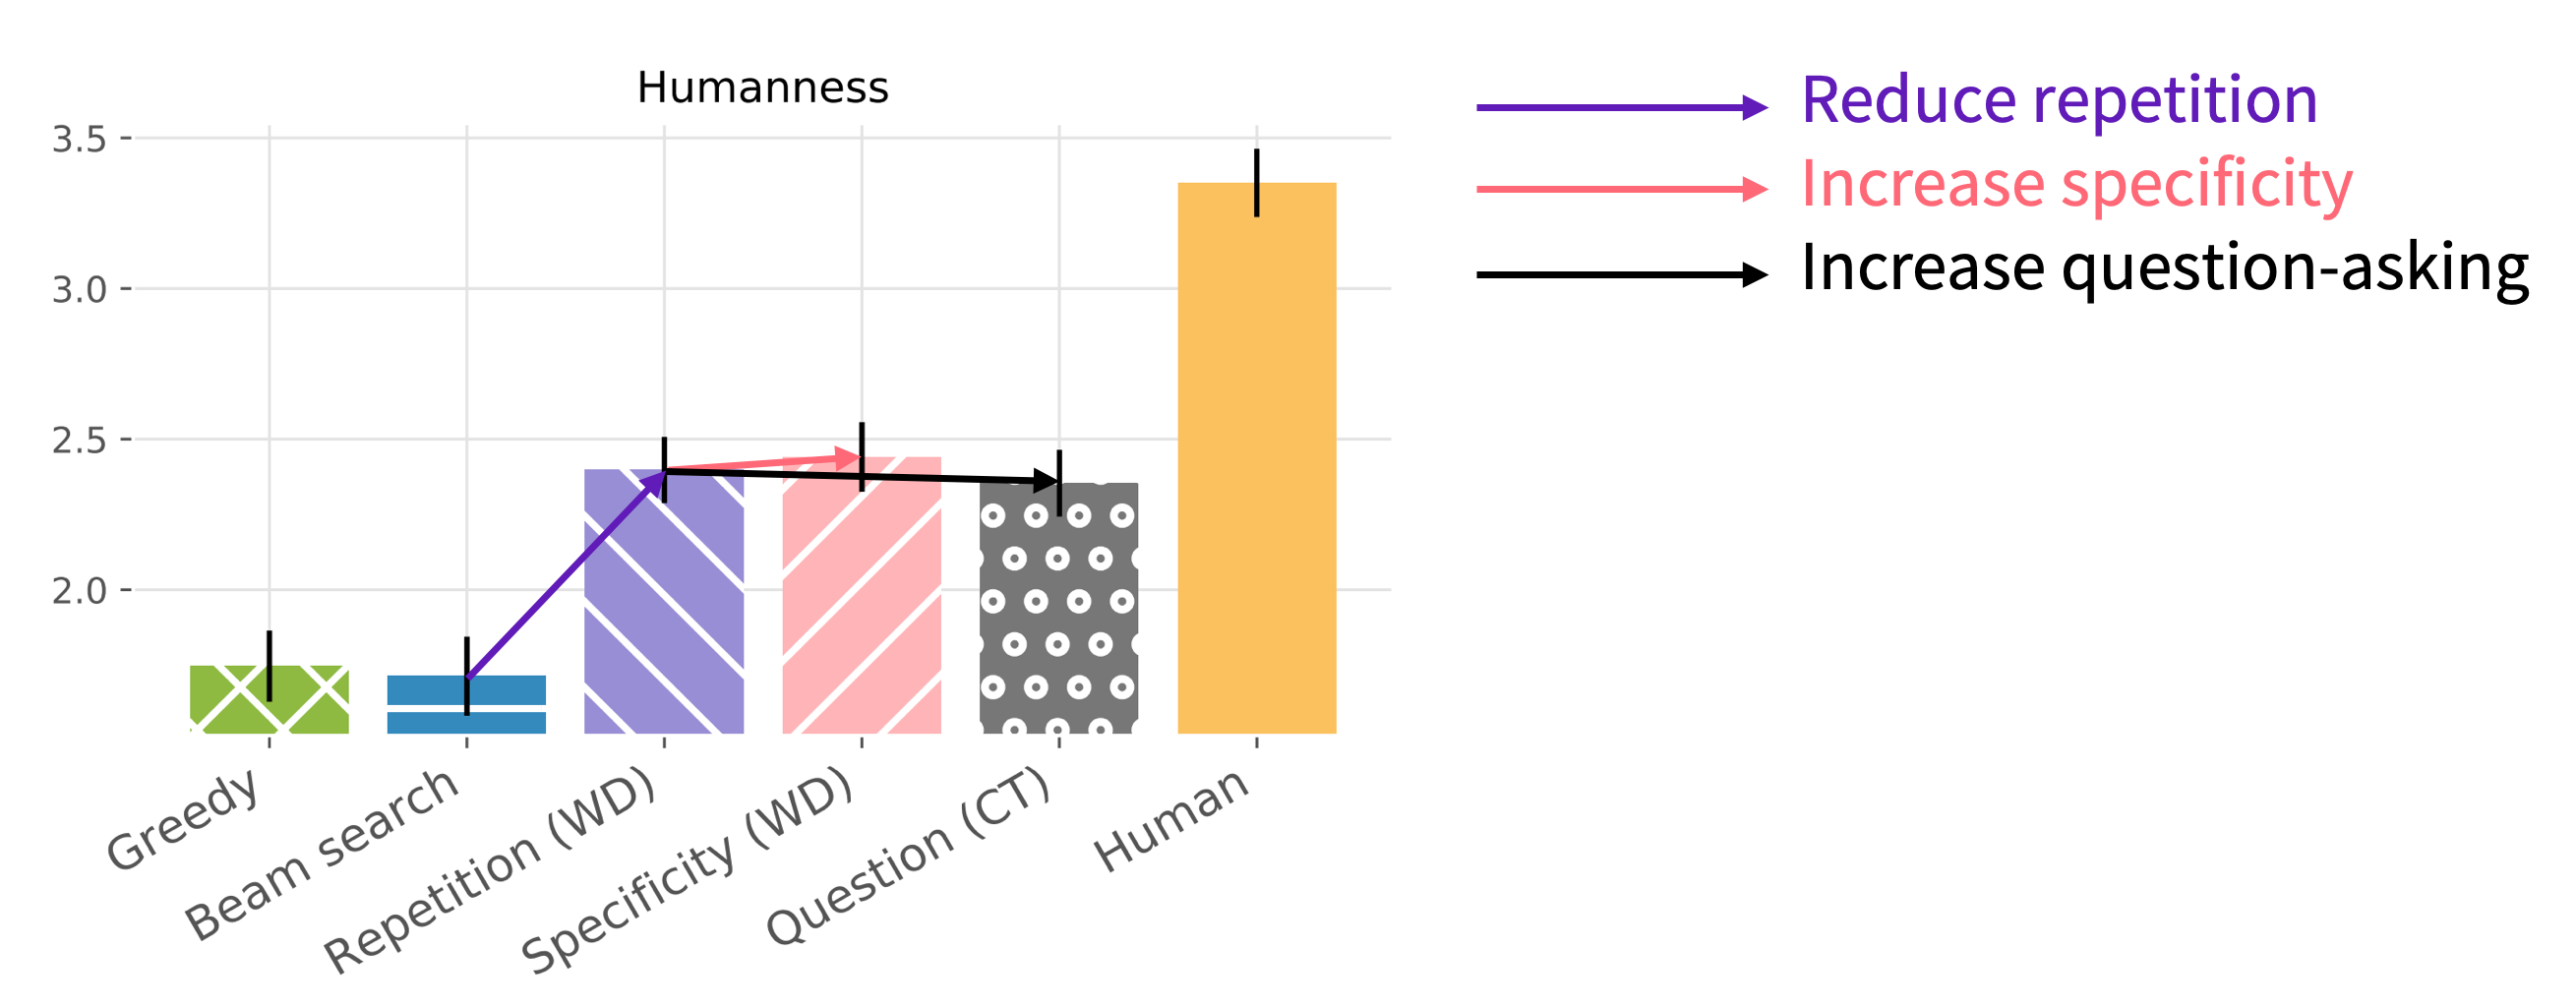 Bar chart showing the limited humanness of the models